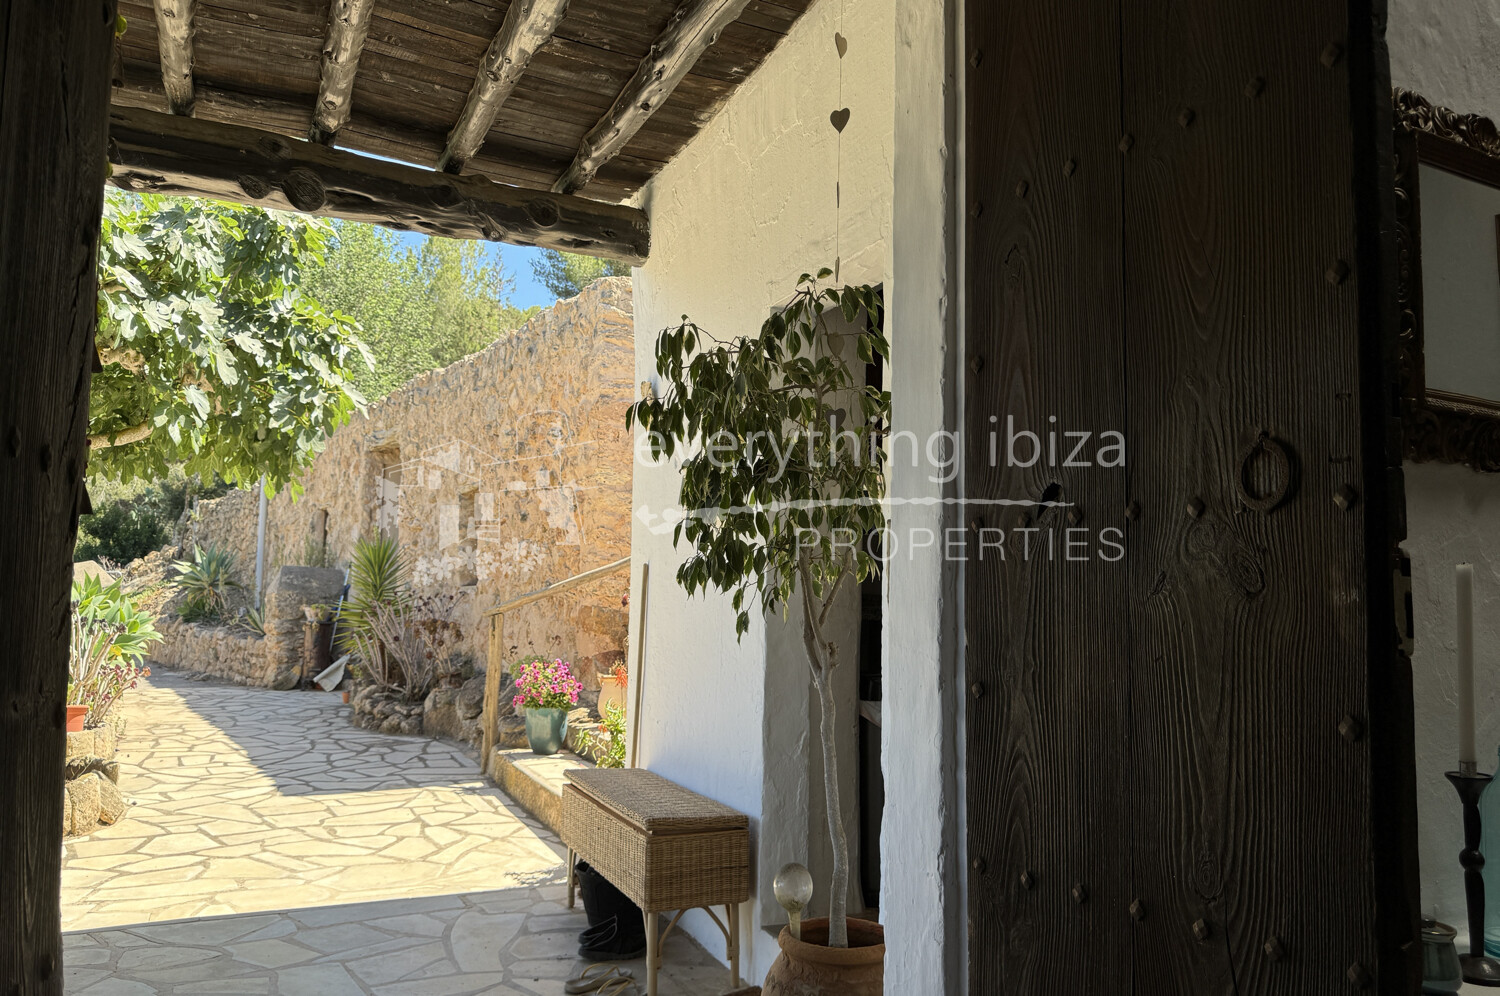 Beautiful Traditional Finca with 2 Separate Annexes Set in a Peaceful Rural Area, ref. 1715, for sale in Ibiza by everything ibiza Properties